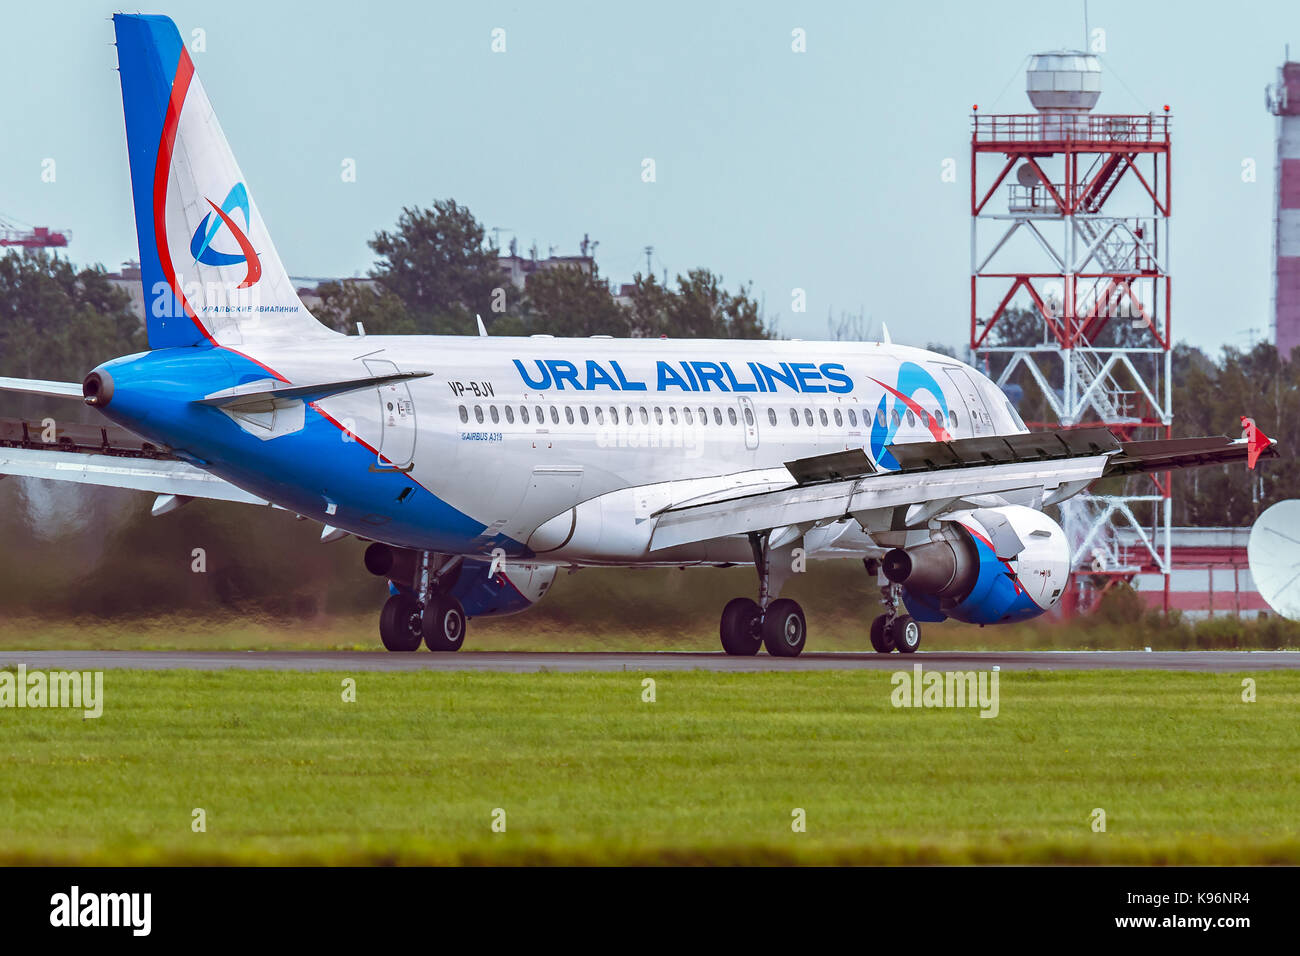 Pulkovo, Saint-Petersburg, Russia - August 10, 2017:   The airplane Airbus A319 of Ural Airlines is moving on the runway against the background of the Stock Photo